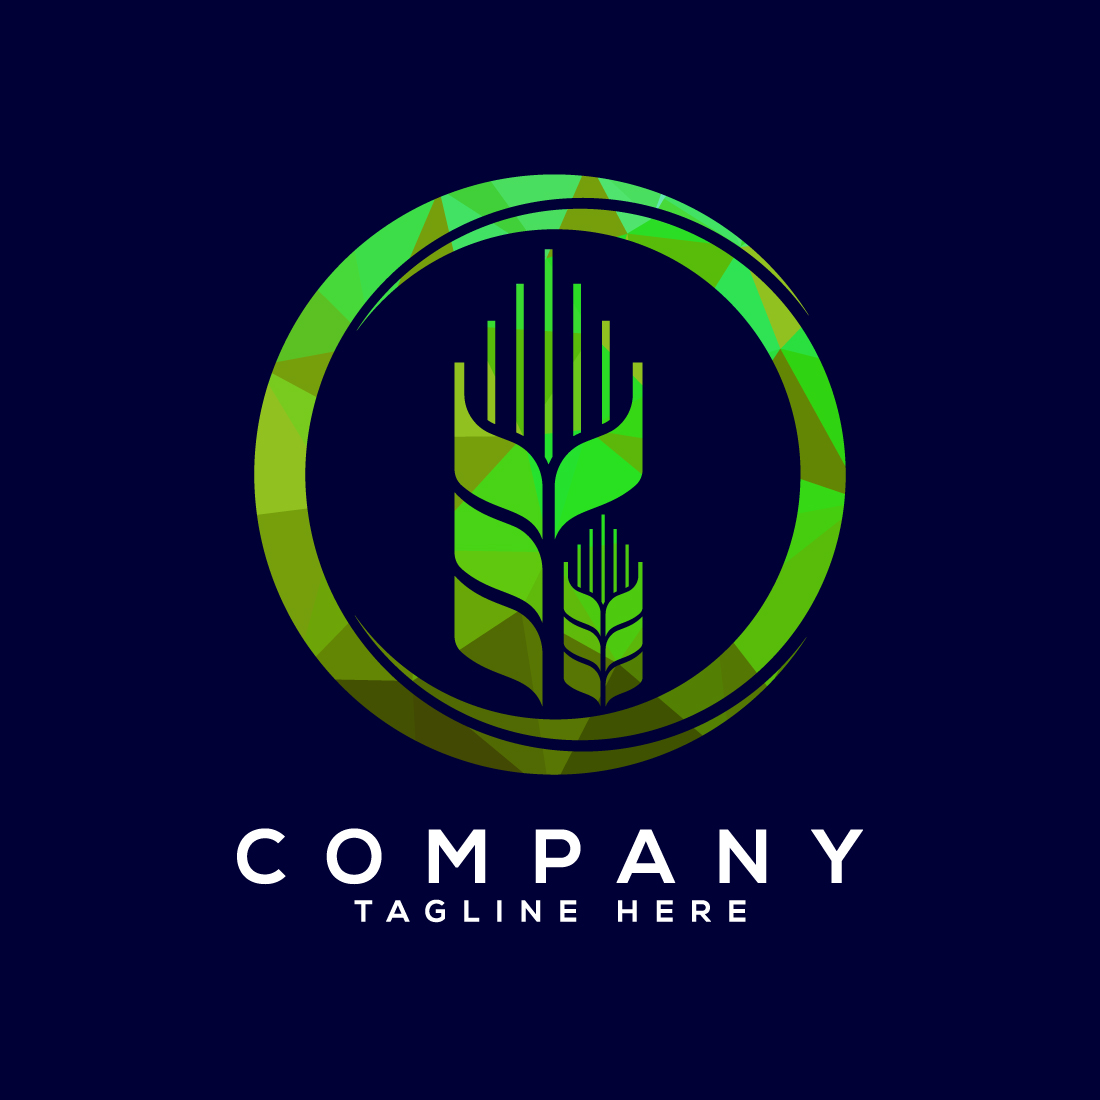 Wheat In Circle Low Poly Style Icon and Logo For Identity Style of Natural Product Company and Farm Company cover image.